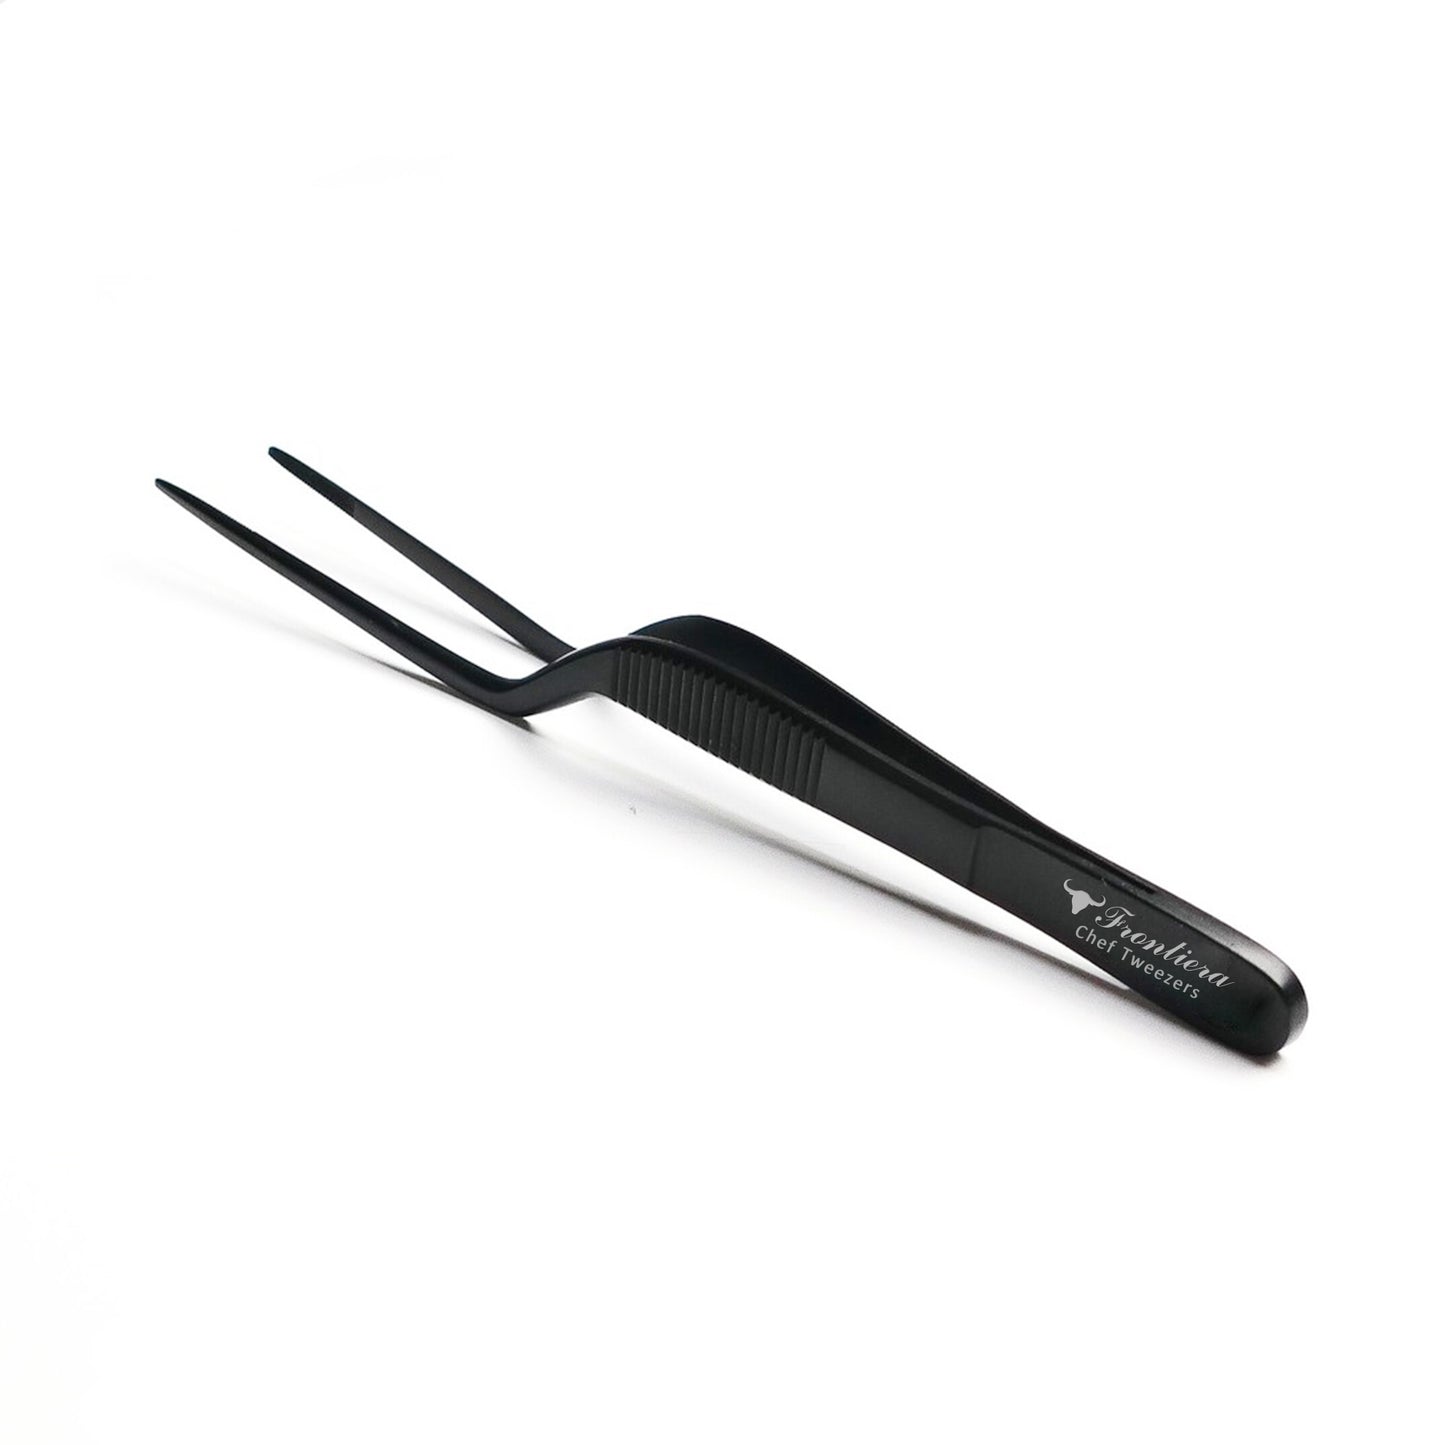 High Precision Offset Chef's Tweezers (14cm/5.5") BLACK + Custome Engraving (Optional)